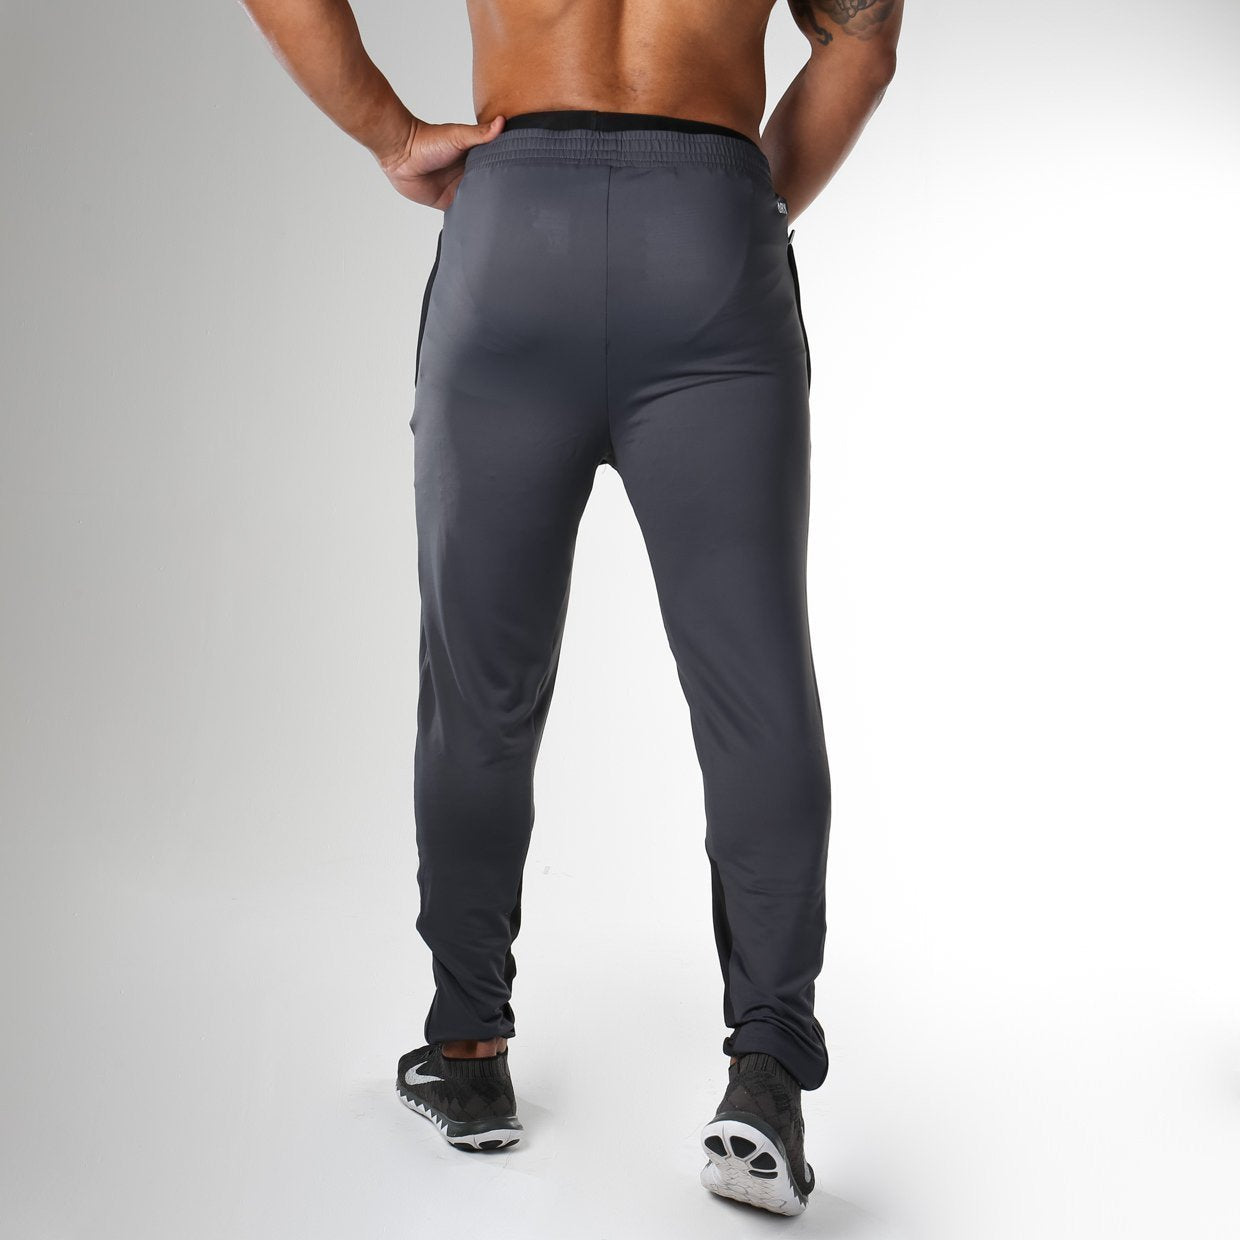 Reactive Training Pant in Charcoal/Black - view 2